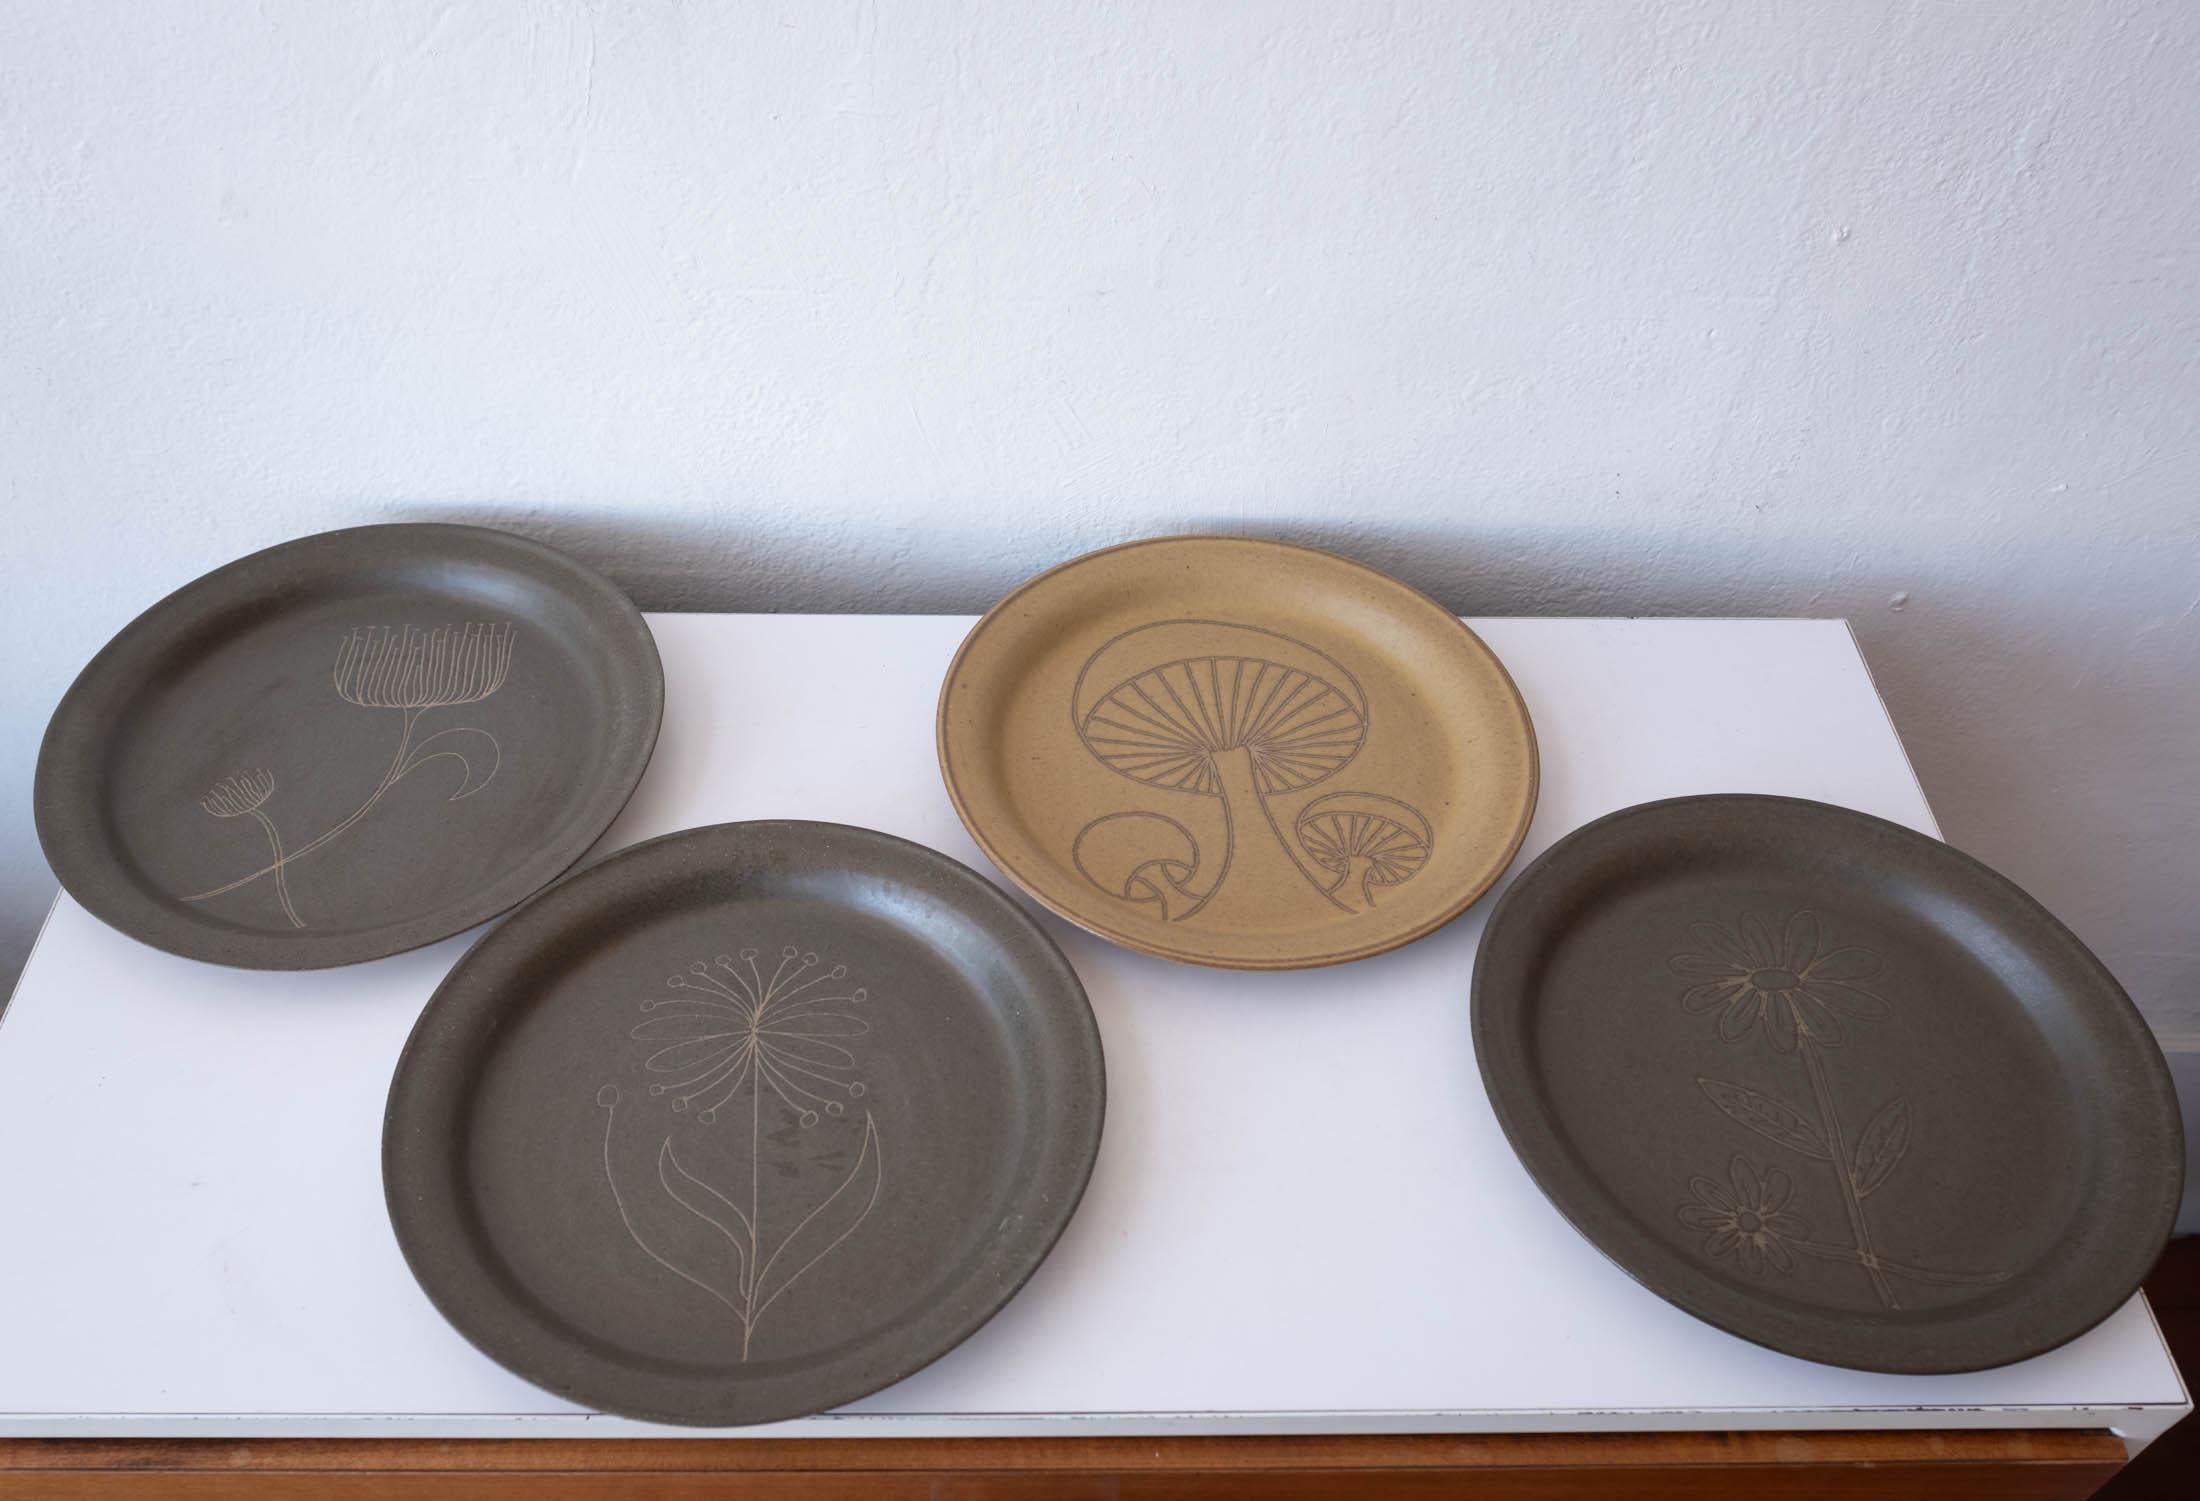 Four hard to find plates and a bowl by Jane and Gordon Martz for their company, Marshall Studios. Incised designs on all pieces. Signed on the back of each piece. 1950s USA.

Jane Marshall married Gordon Martz soon after leaving the prestigious